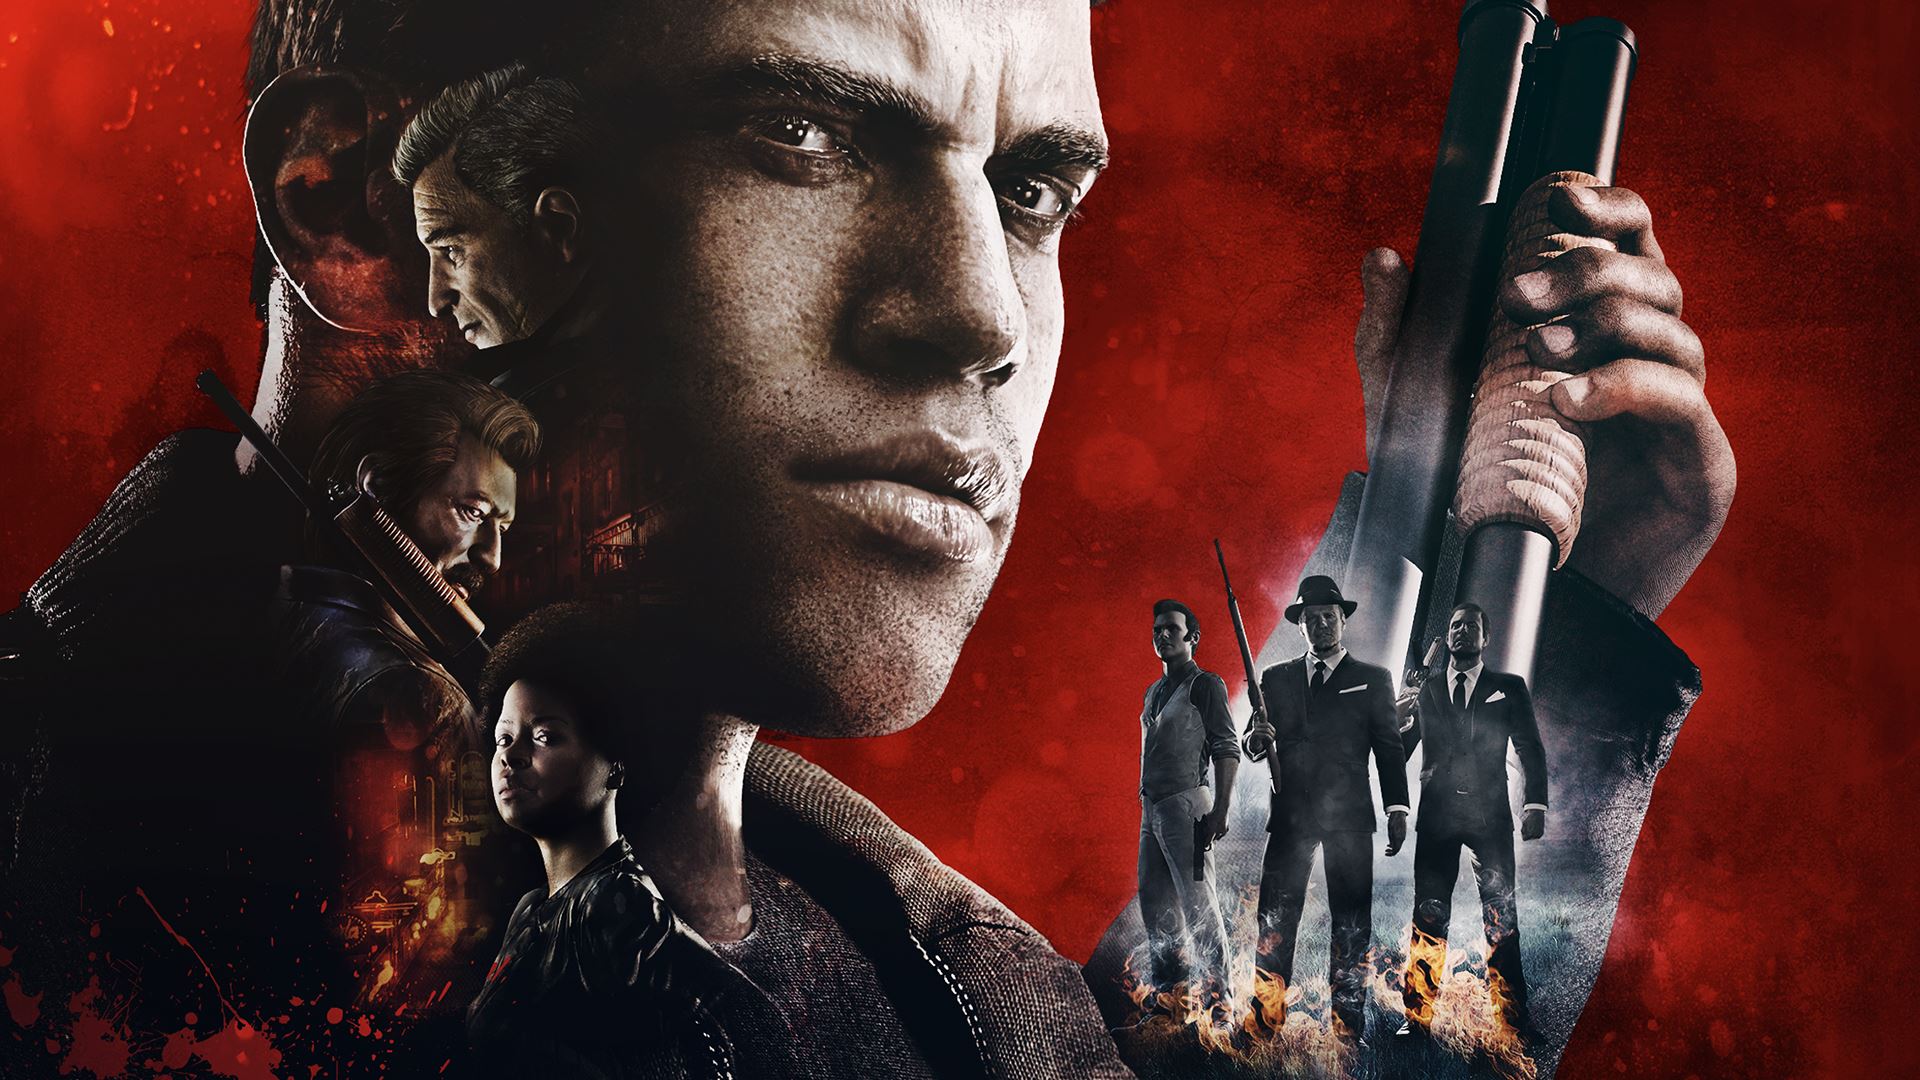 Image for Mafia 3 dev opens UK office to work on unannounced AAA title